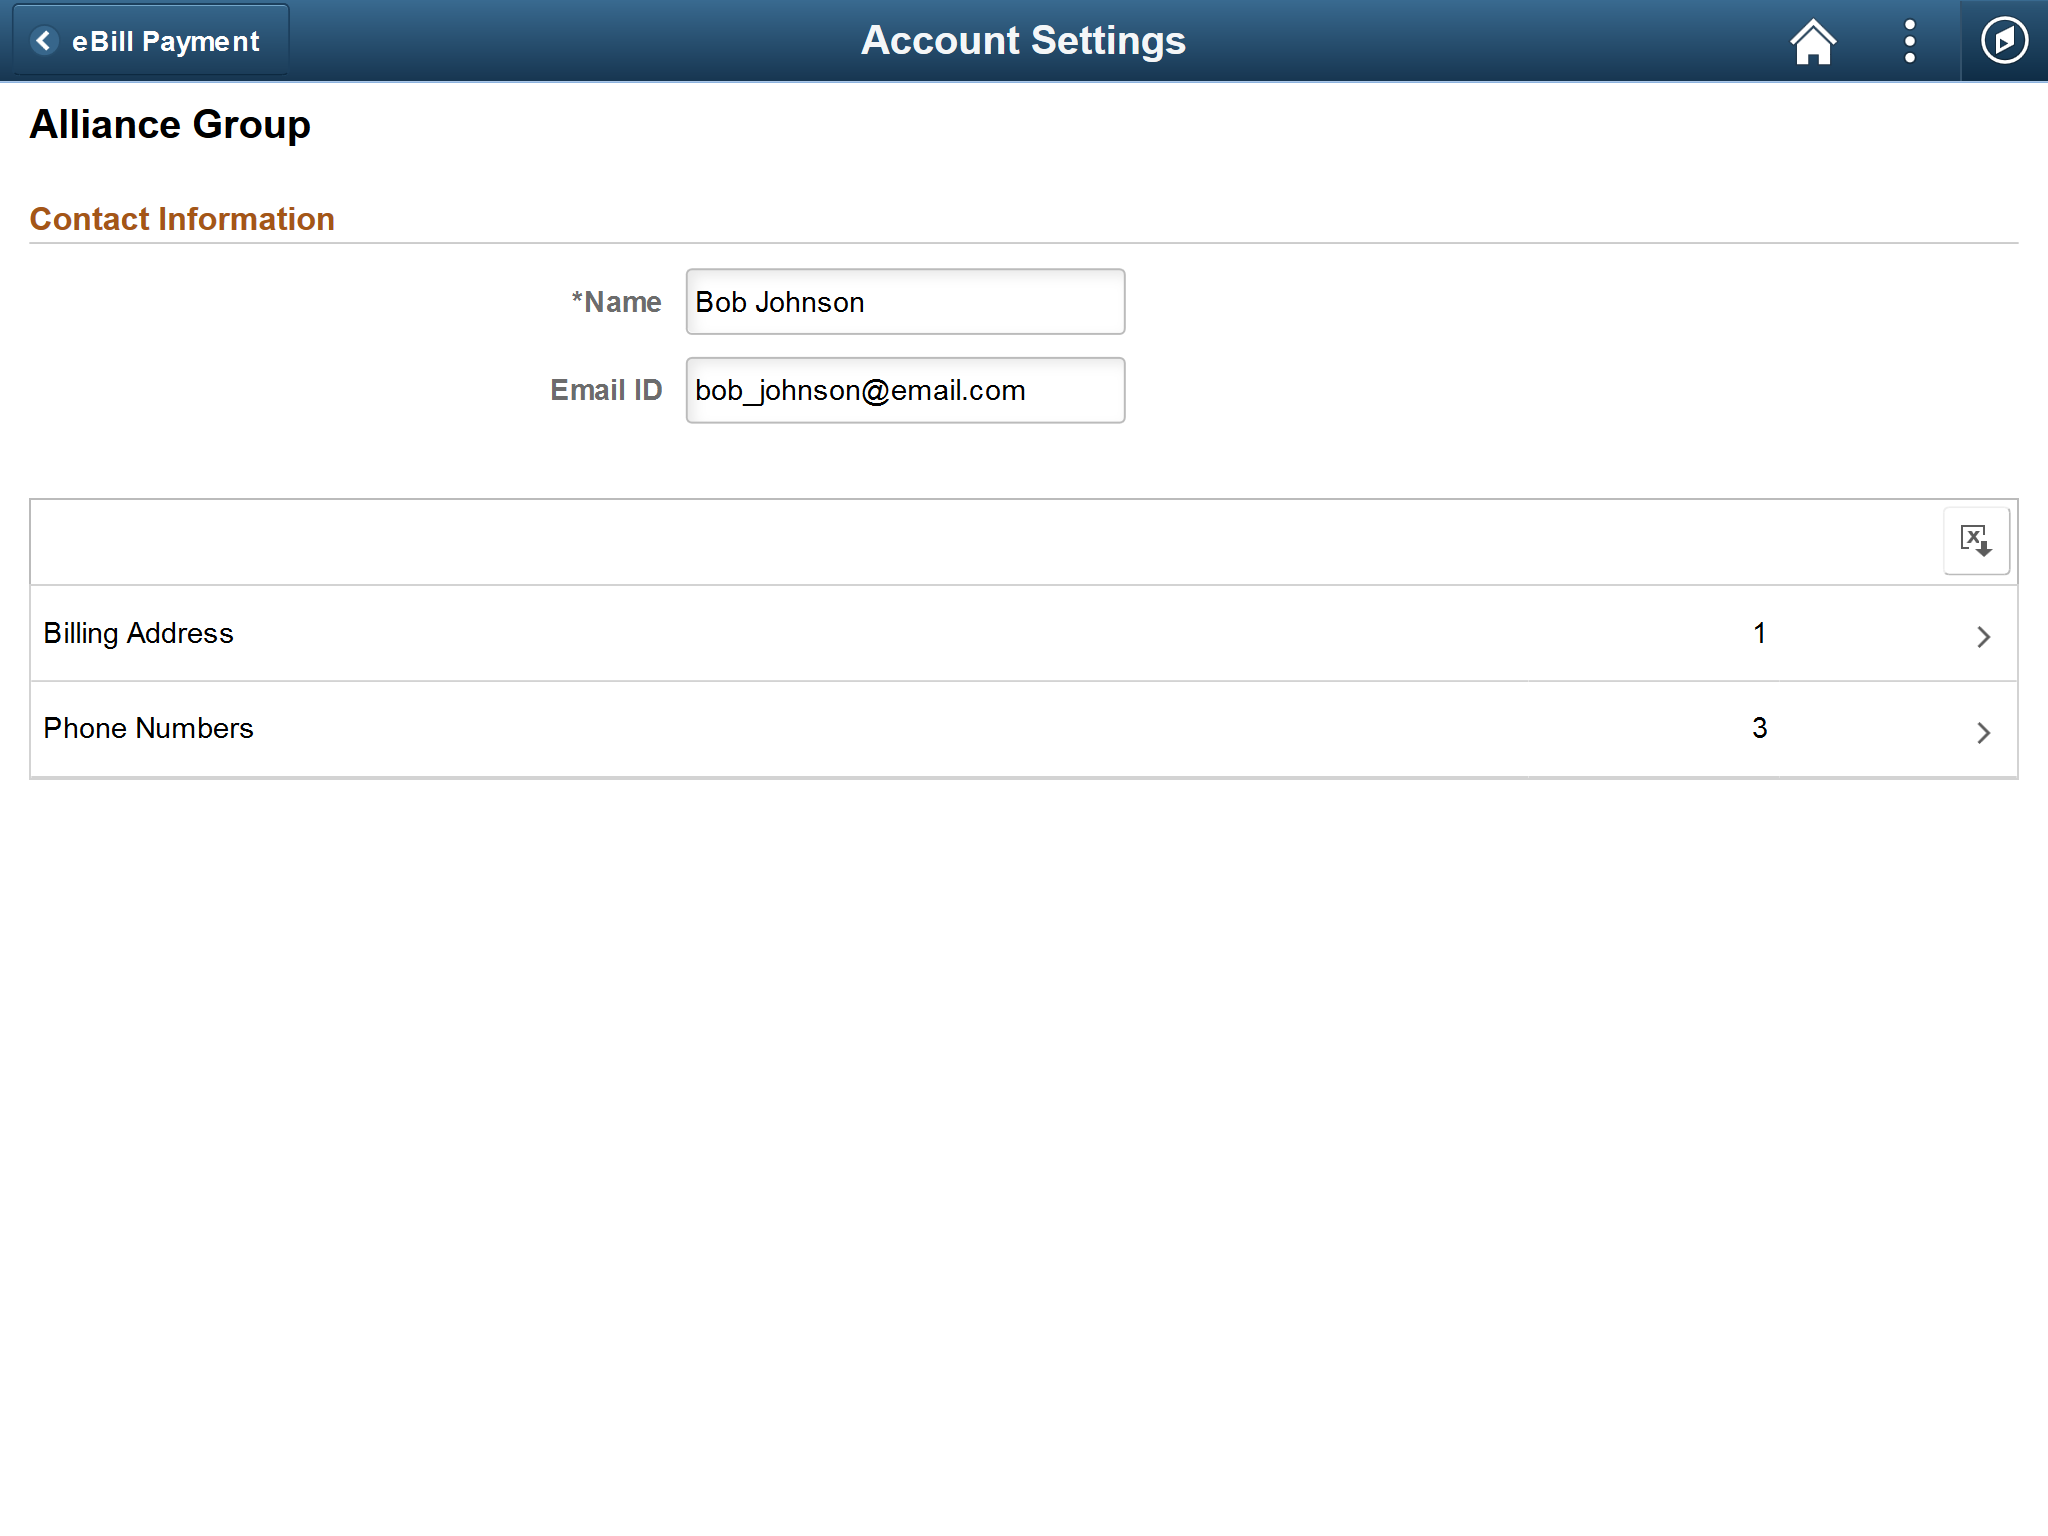 Account Settings page